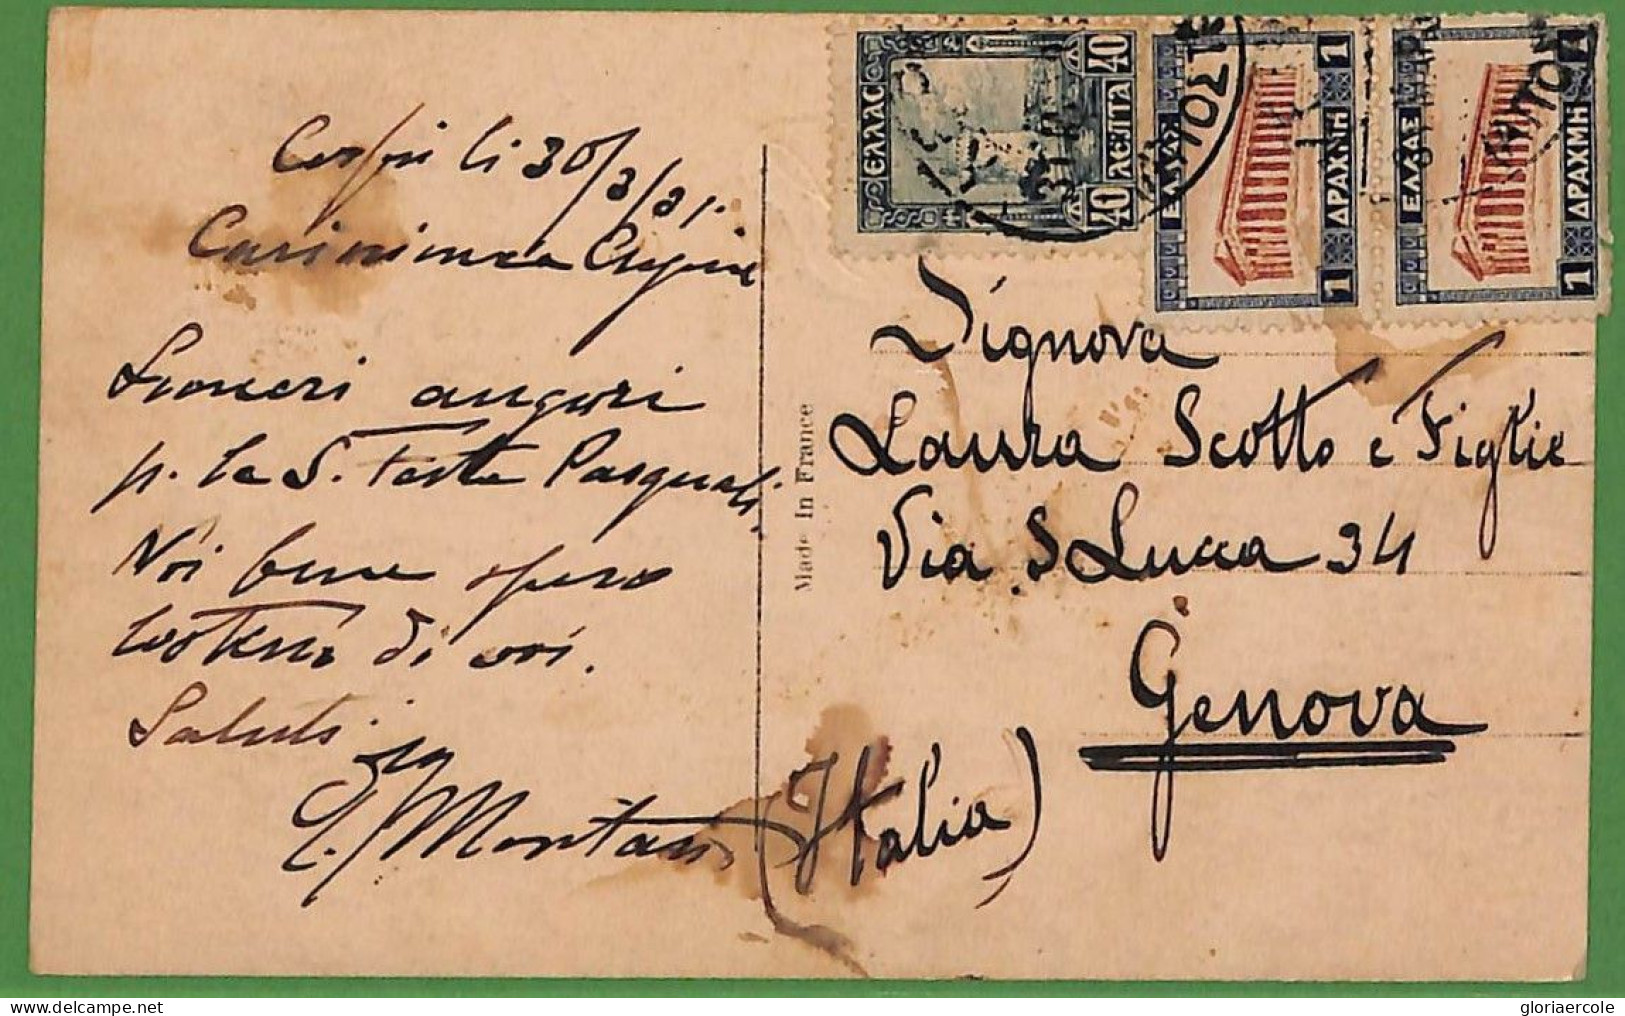 Ad0908 - GREECE - Postal History -  POSTCARD To ITALY 1921 - Covers & Documents